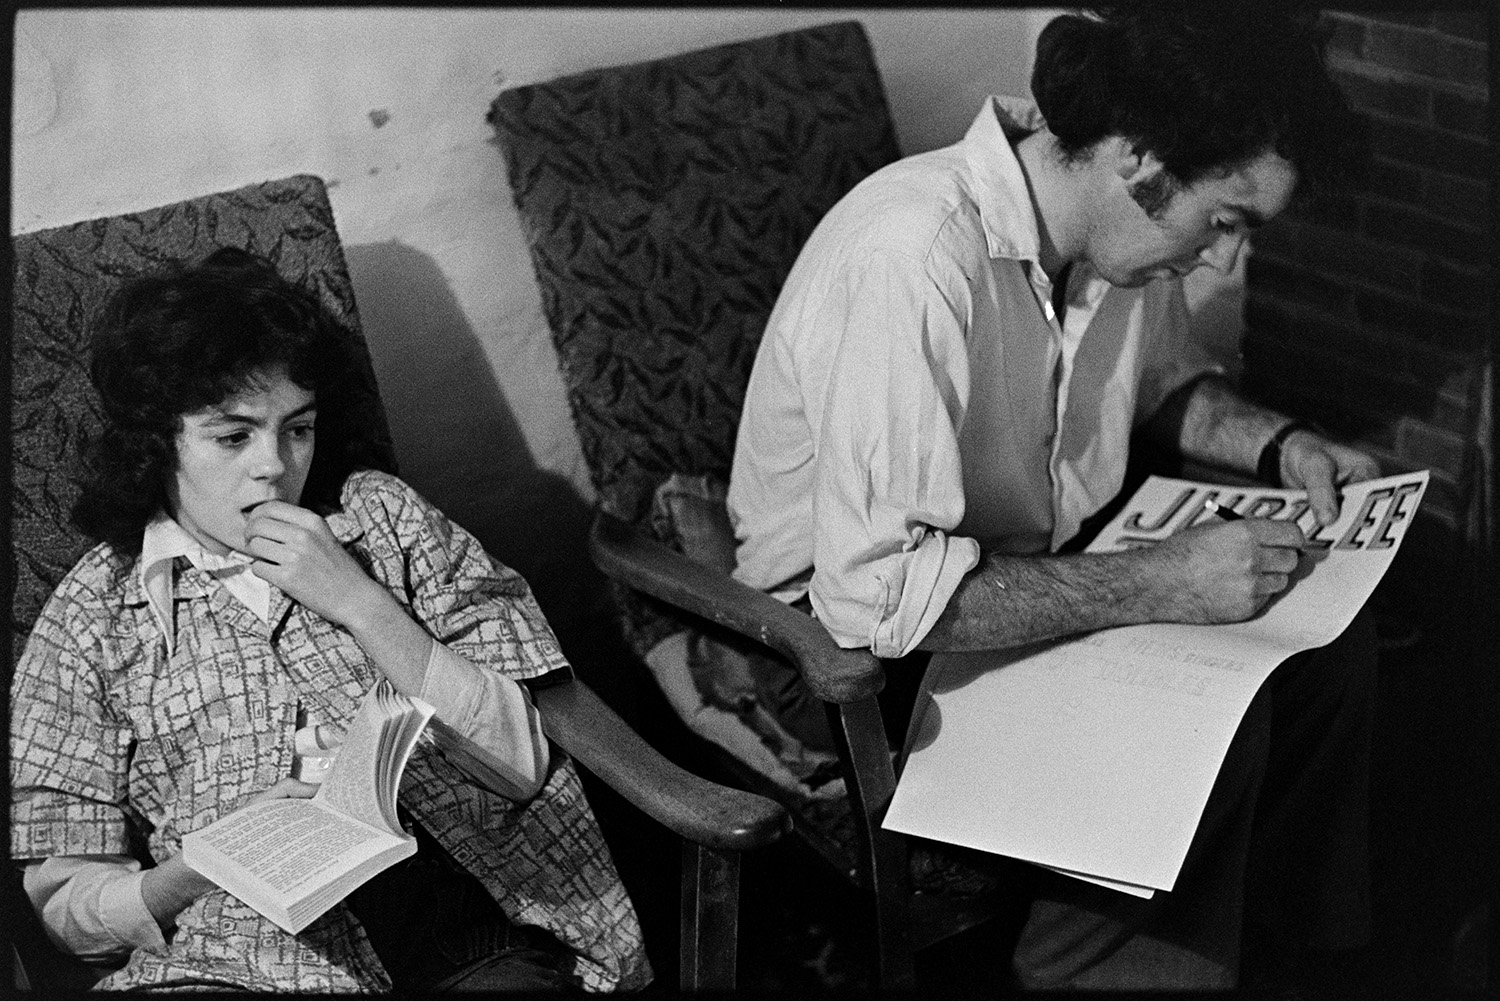 Brother and sister sitting down reading and designing poster. 
[Elizabeth Ward and Graham Ward sat down in their farmhouse at Parsonage, Iddesleigh. Elizabeth is reading a book and Graham is designing a poster for a Jubilee, possibly Queen Elizabeth II Silver Jubilee.]